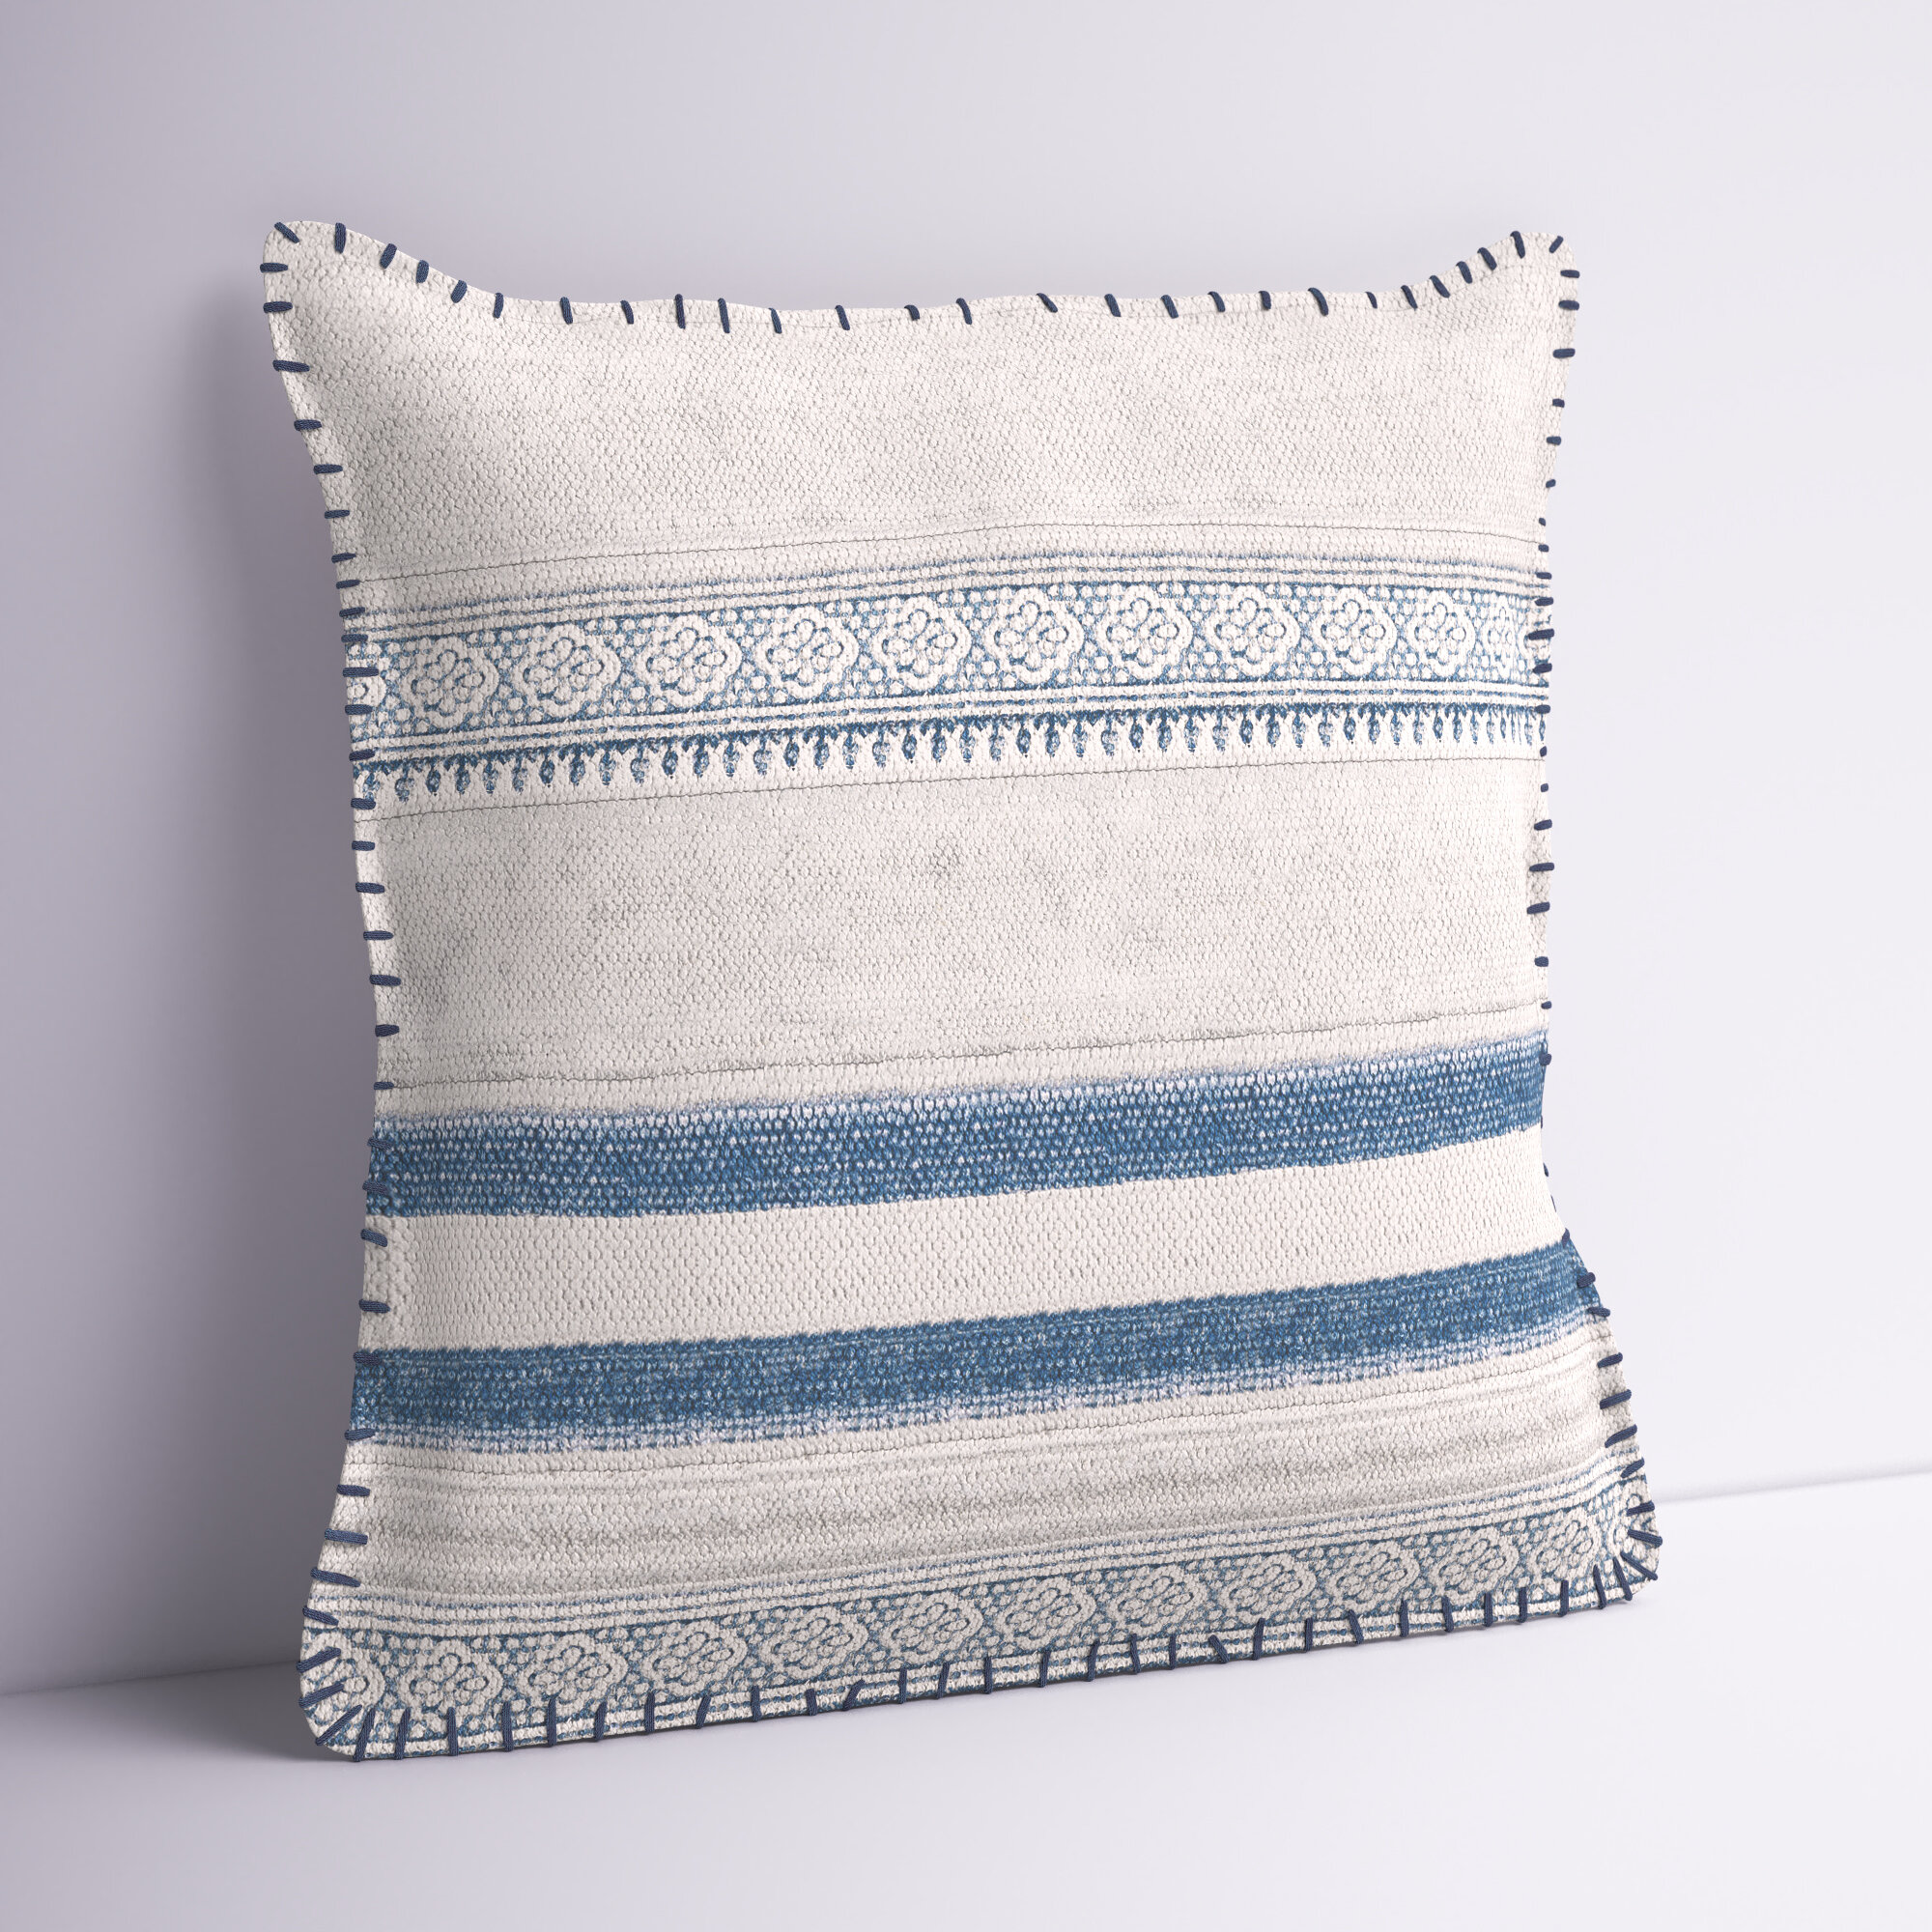 Tappahannock Square Pillow Cover (Set of 2) Dovecove Color: Navy, Size: 20 H x 20 W